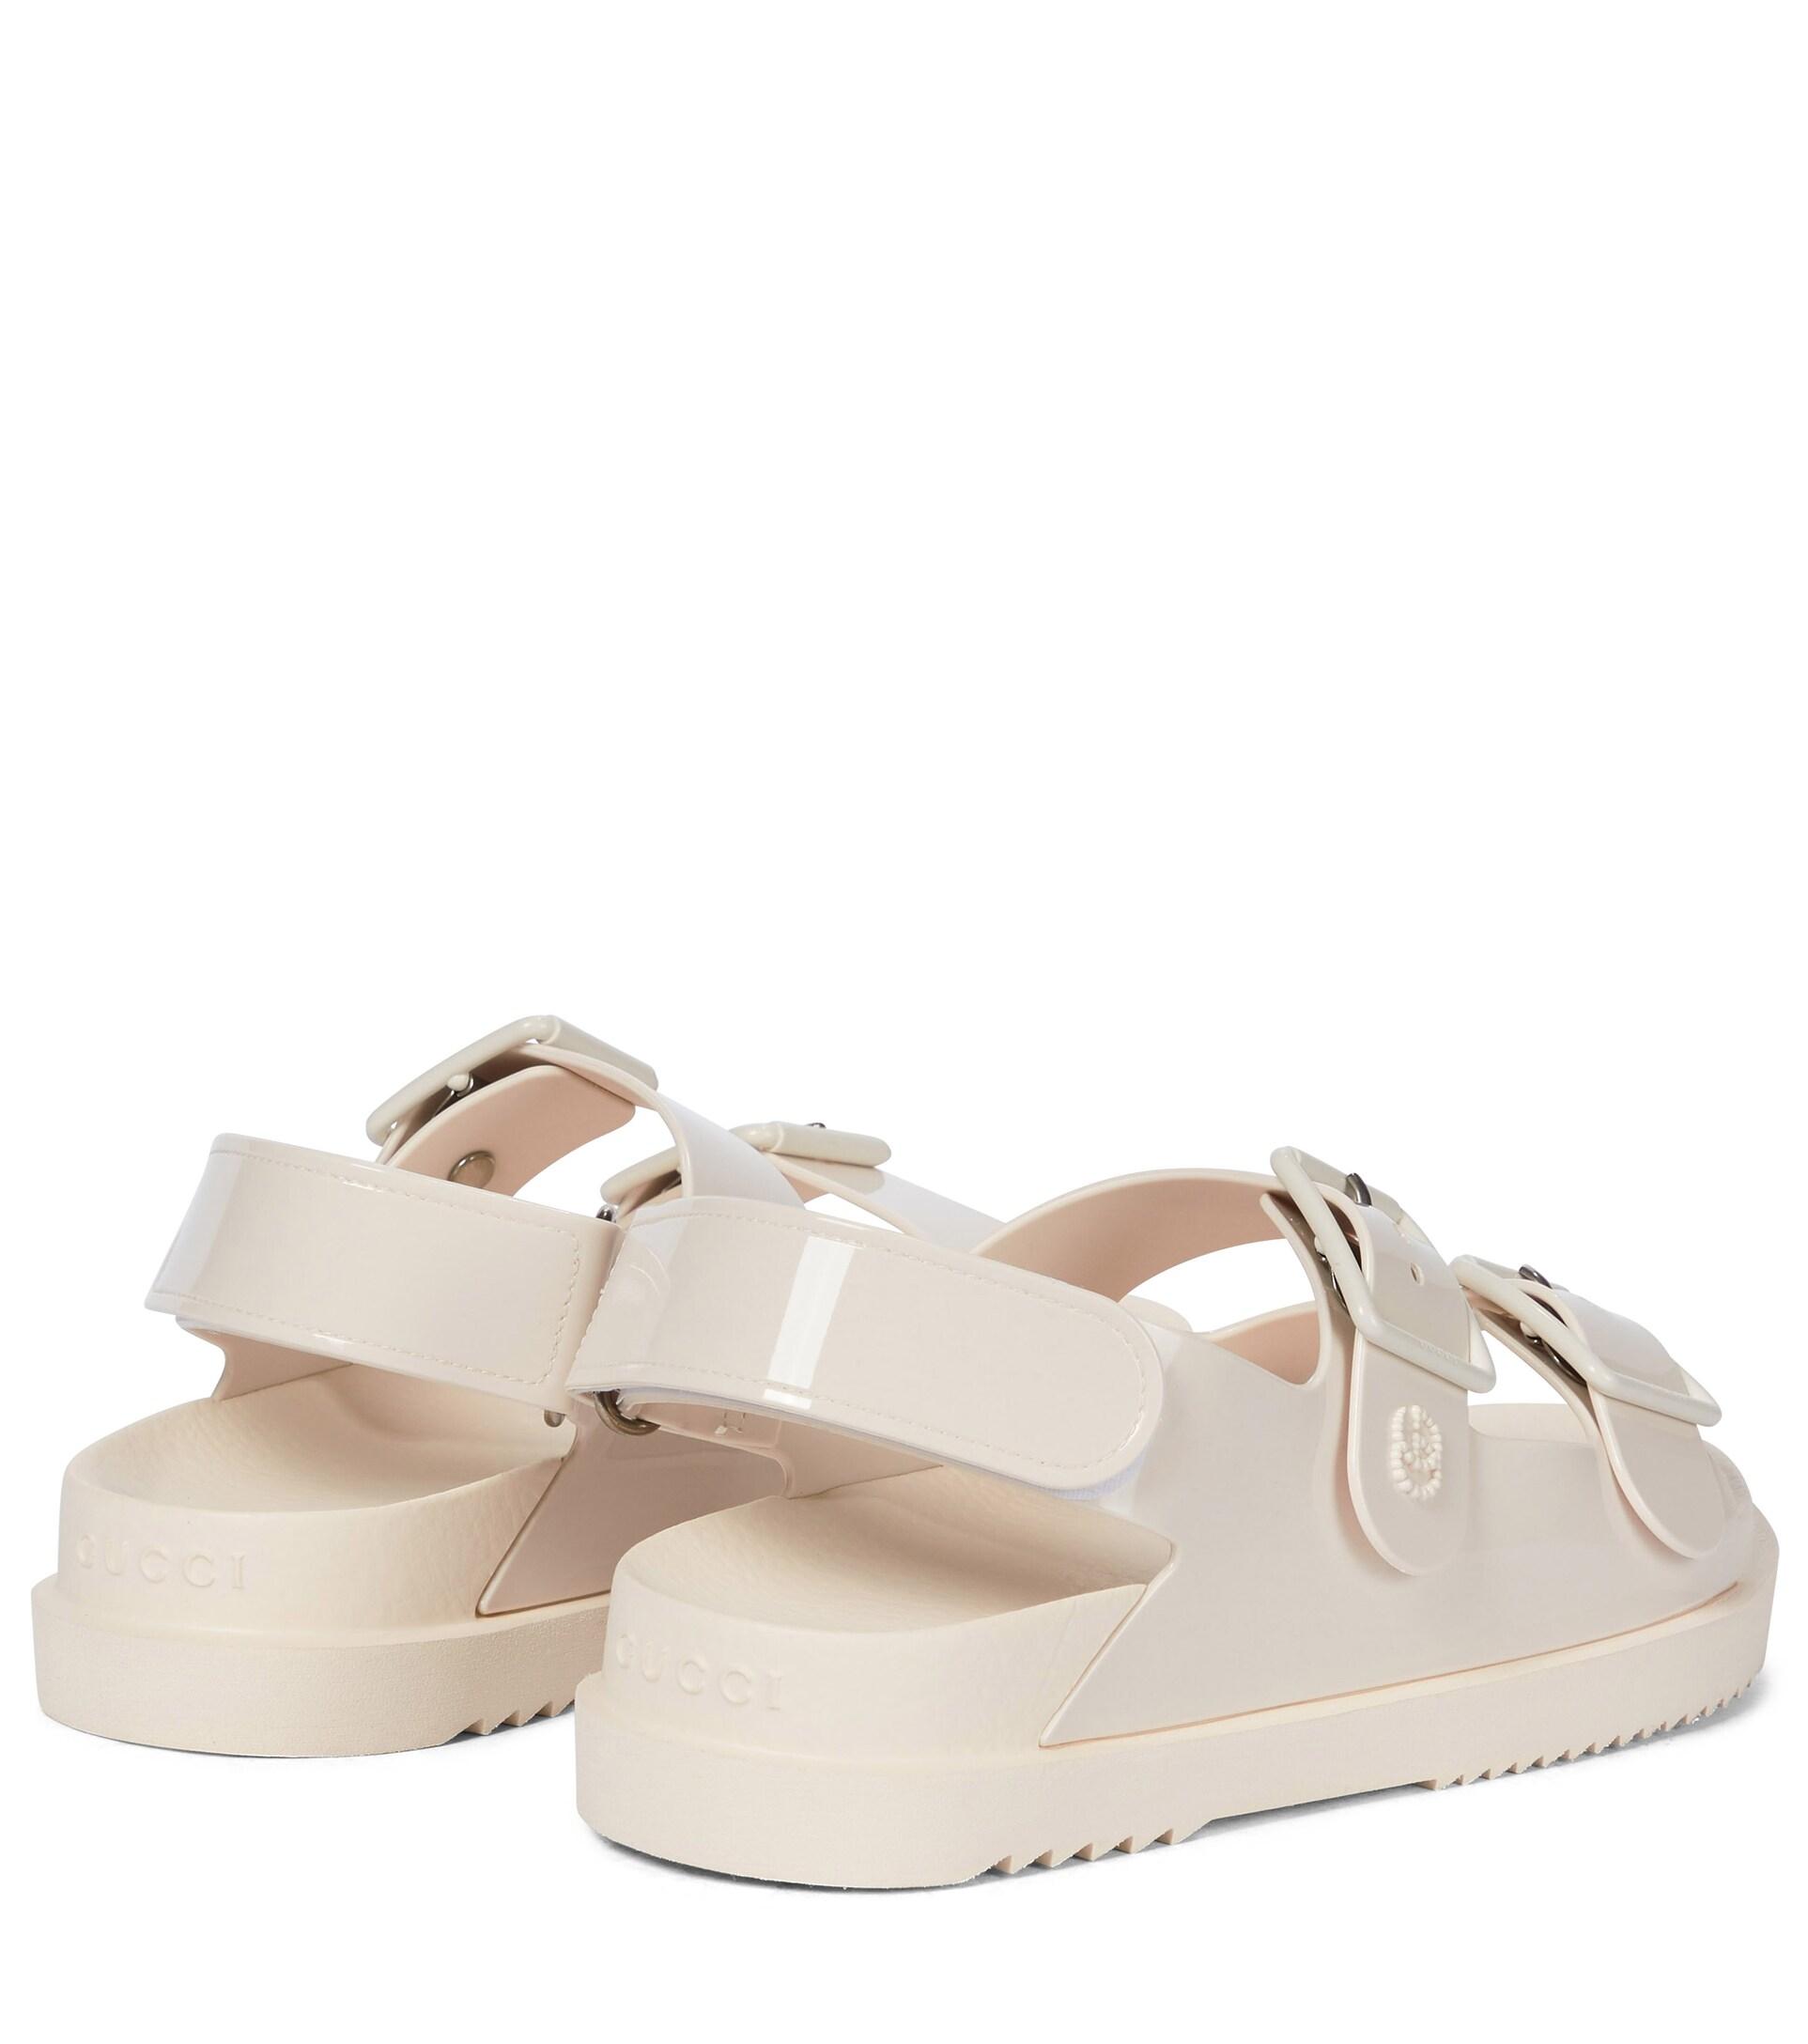 Double G canvas sandals in beige - Gucci | Mytheresa